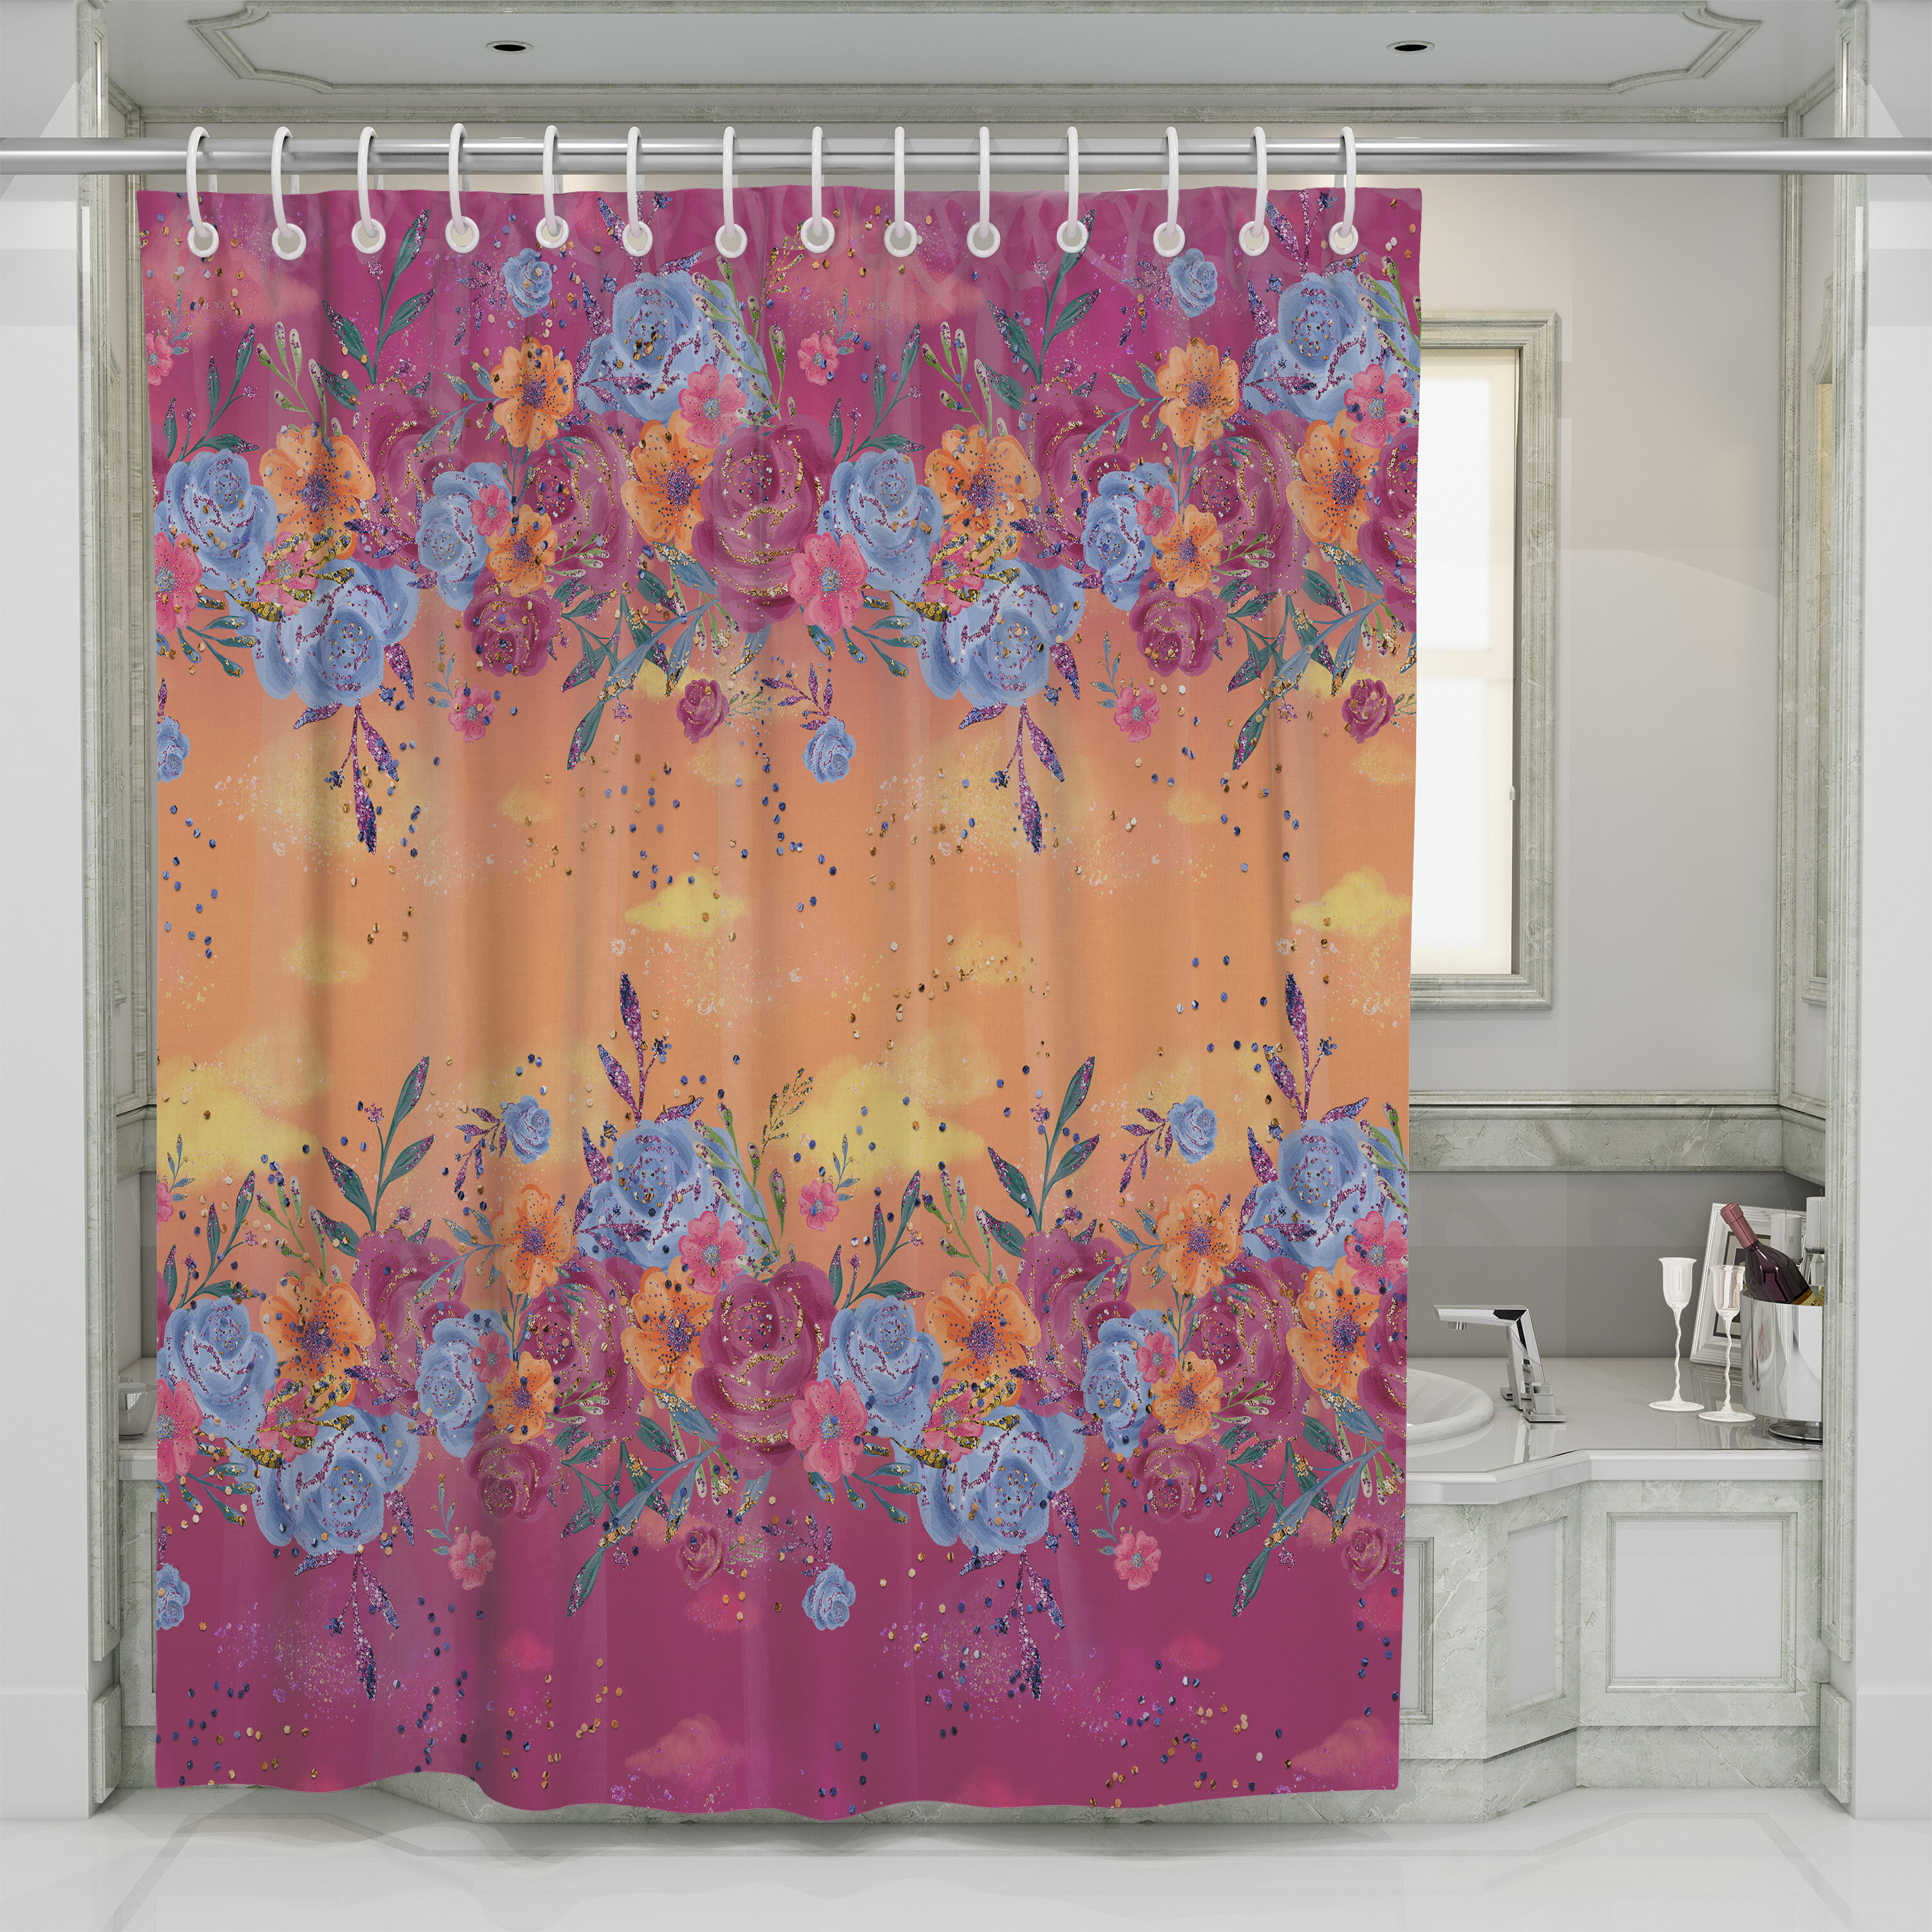 Red/Pink Floral Odorless Shower Curtain with Reinforced Stitches 